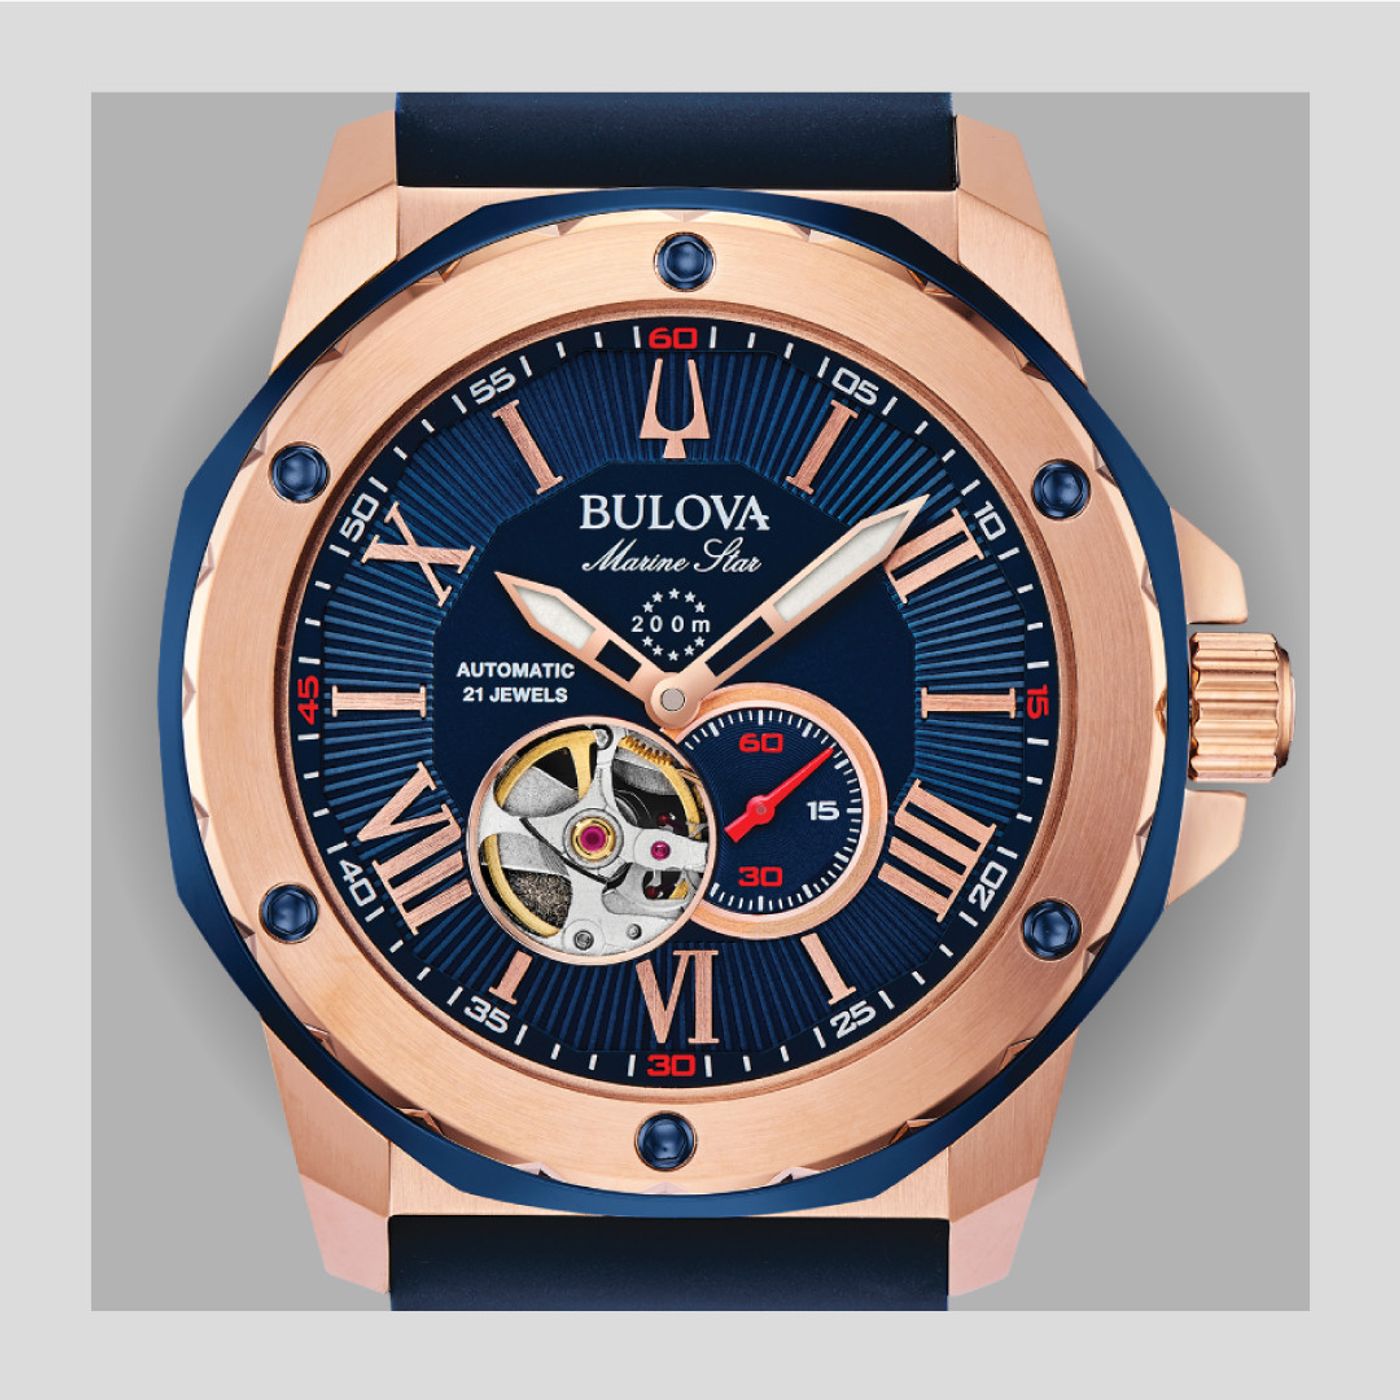 Watch Collection Guide: How to Start a Watch Collection | Bulova